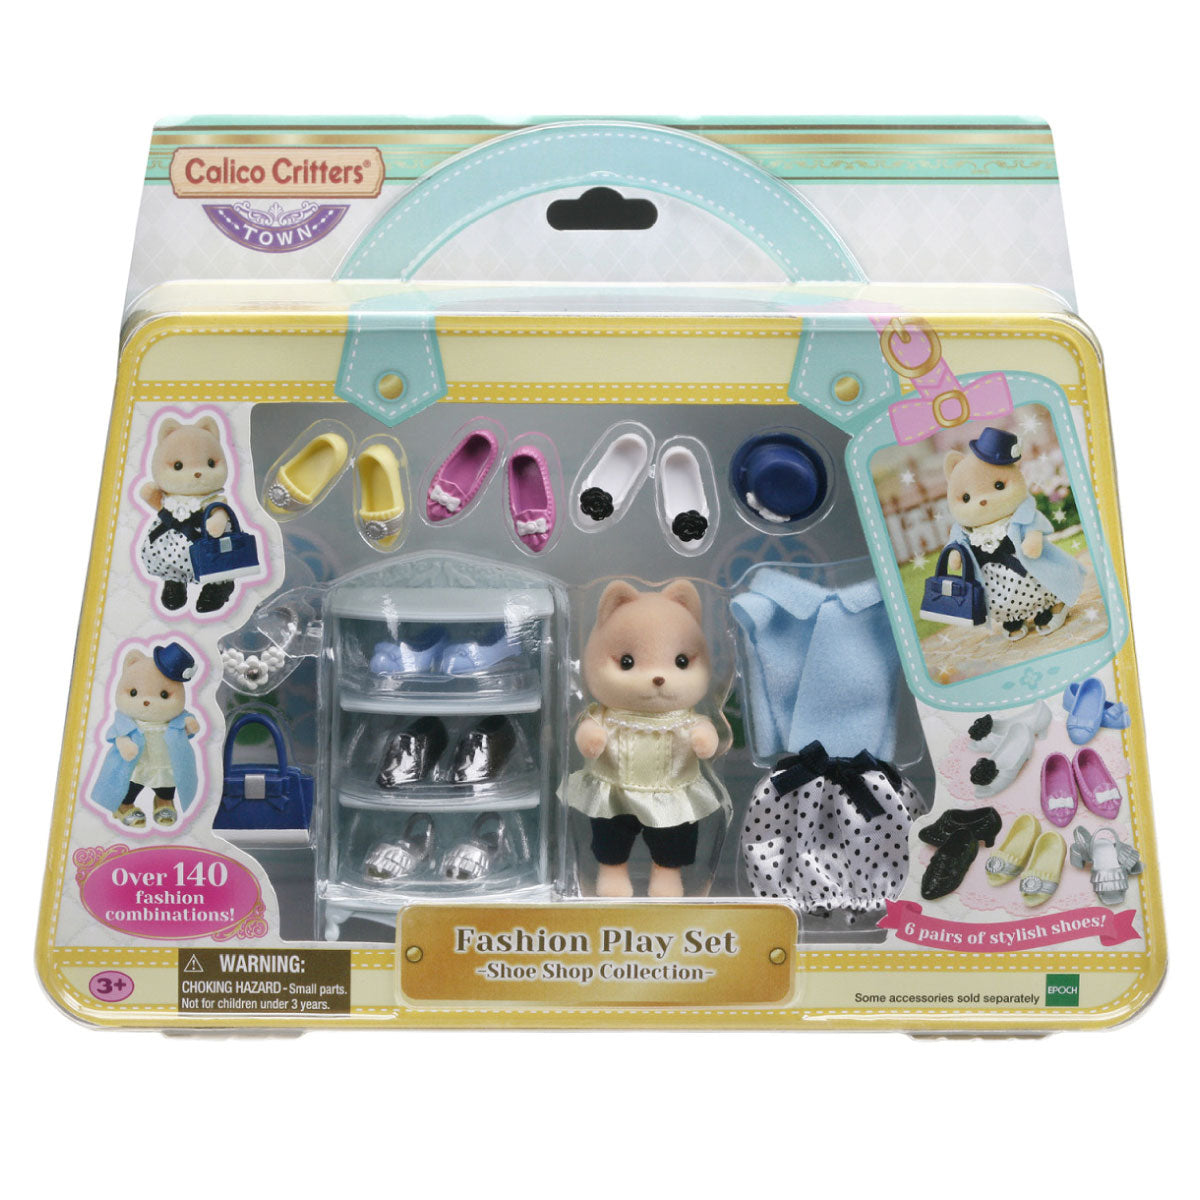 Calico Critters Town Fashion Play Set - Shoe Shop Collection